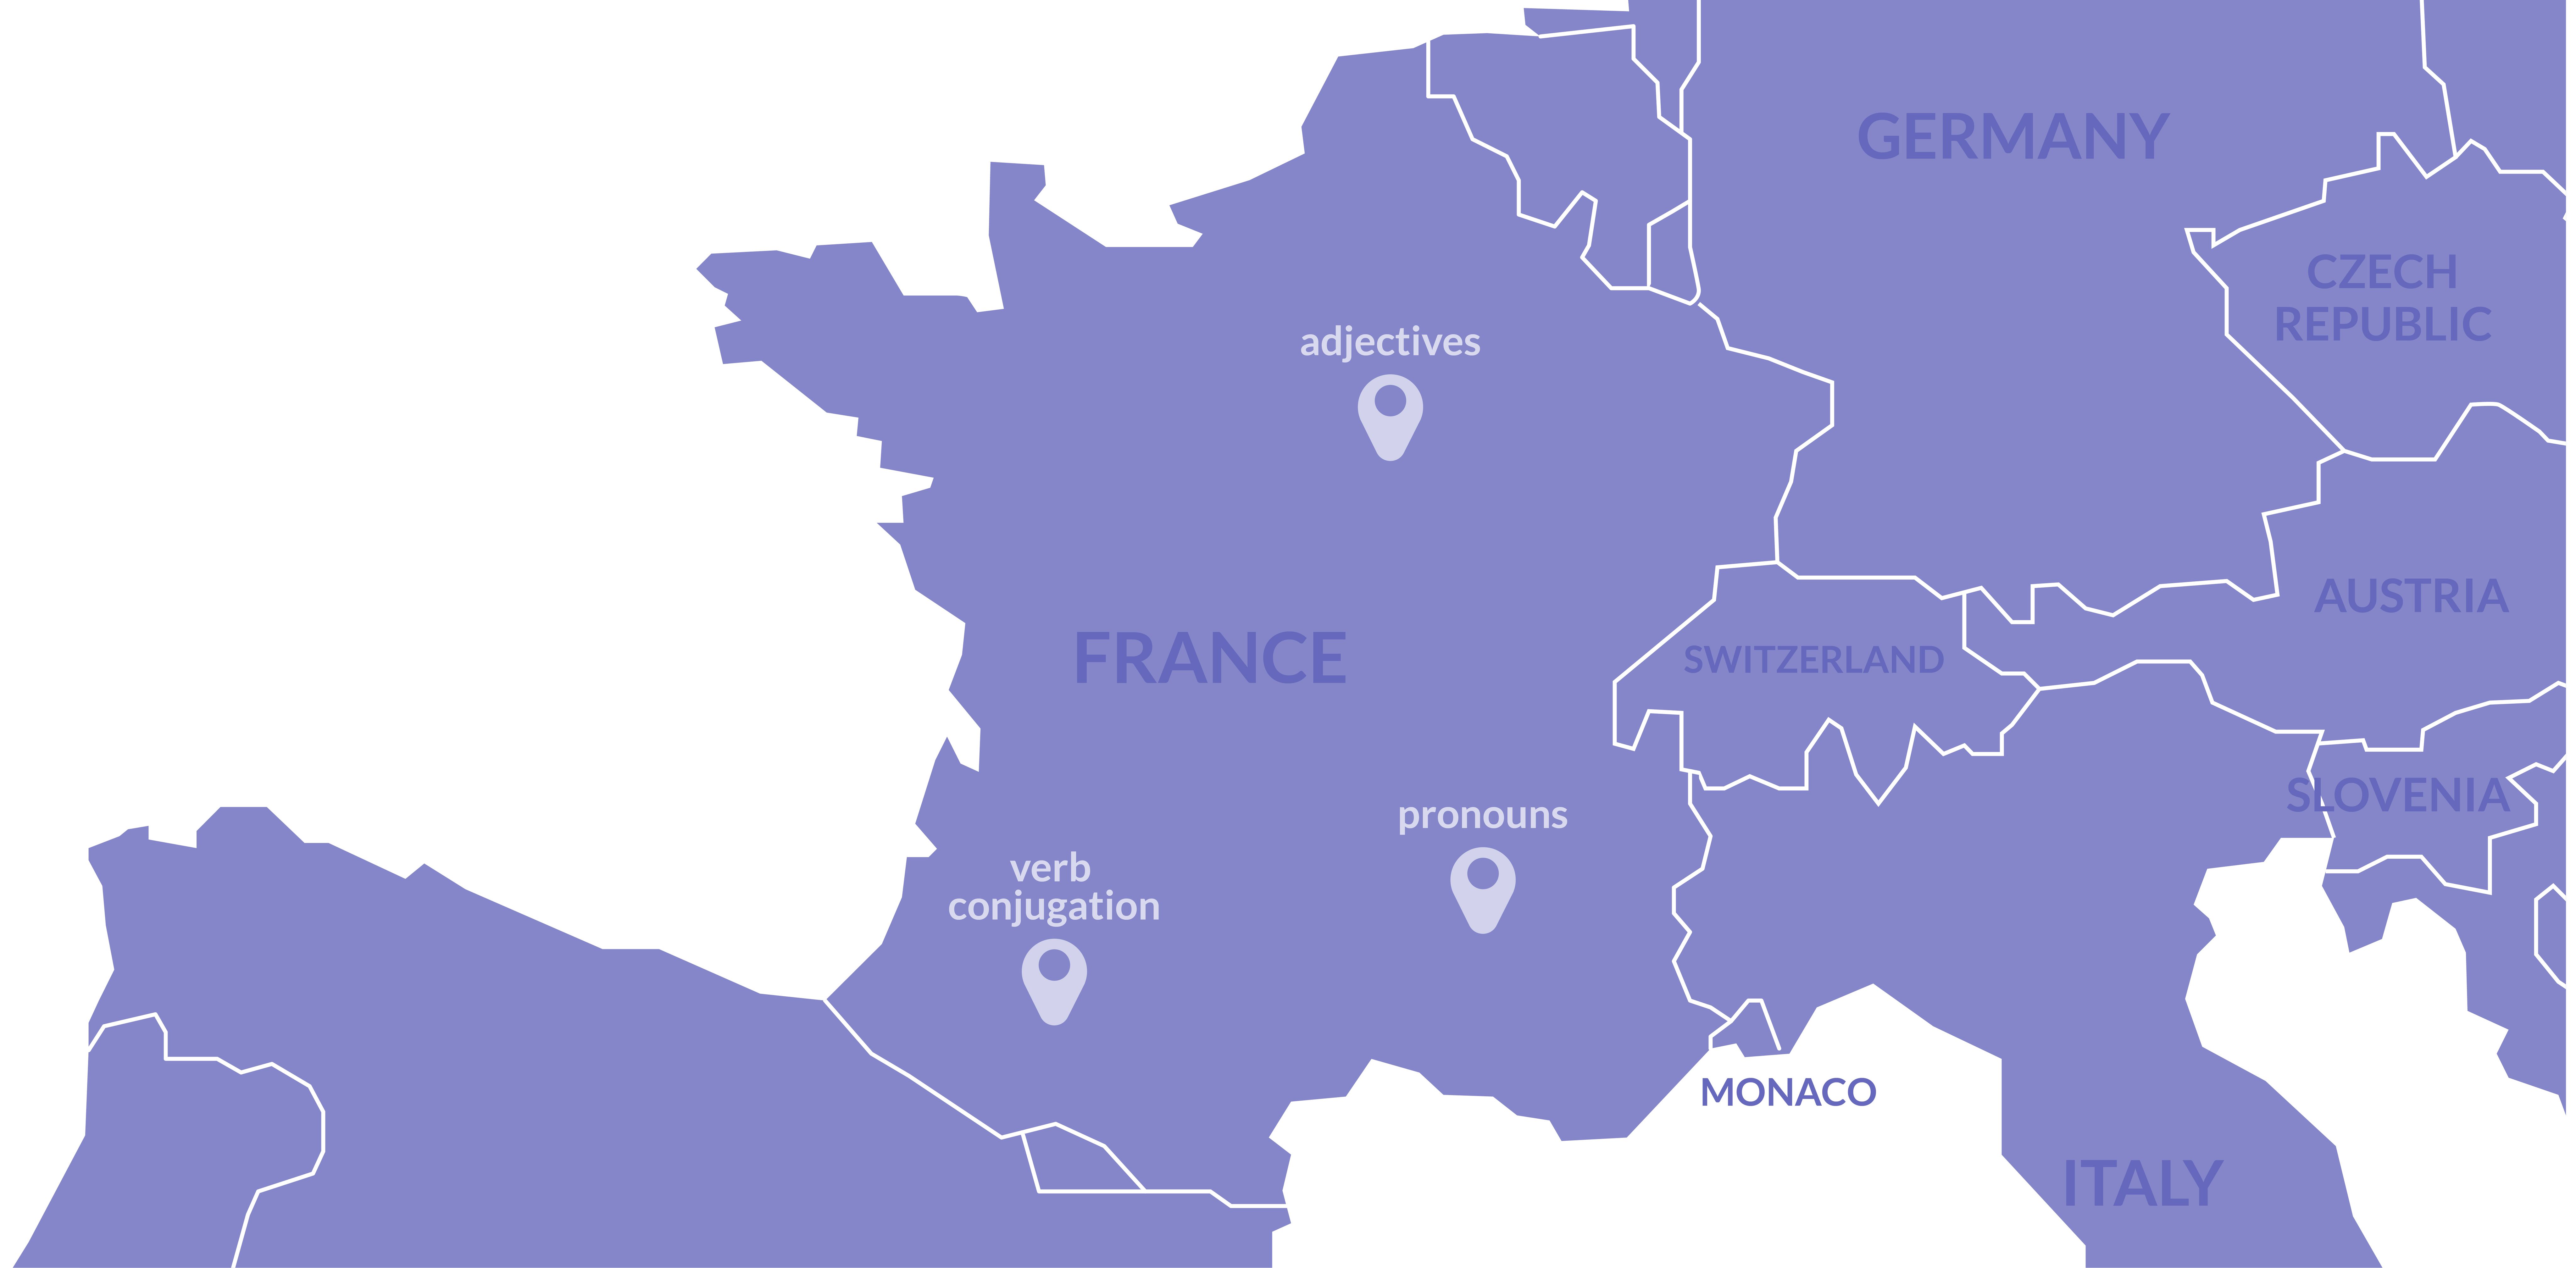 A map of France with various grammar concepts represented by icons placed in different regions (e.g., verb conjugation in Paris, pronouns in Lyon, adjectives in Nice).